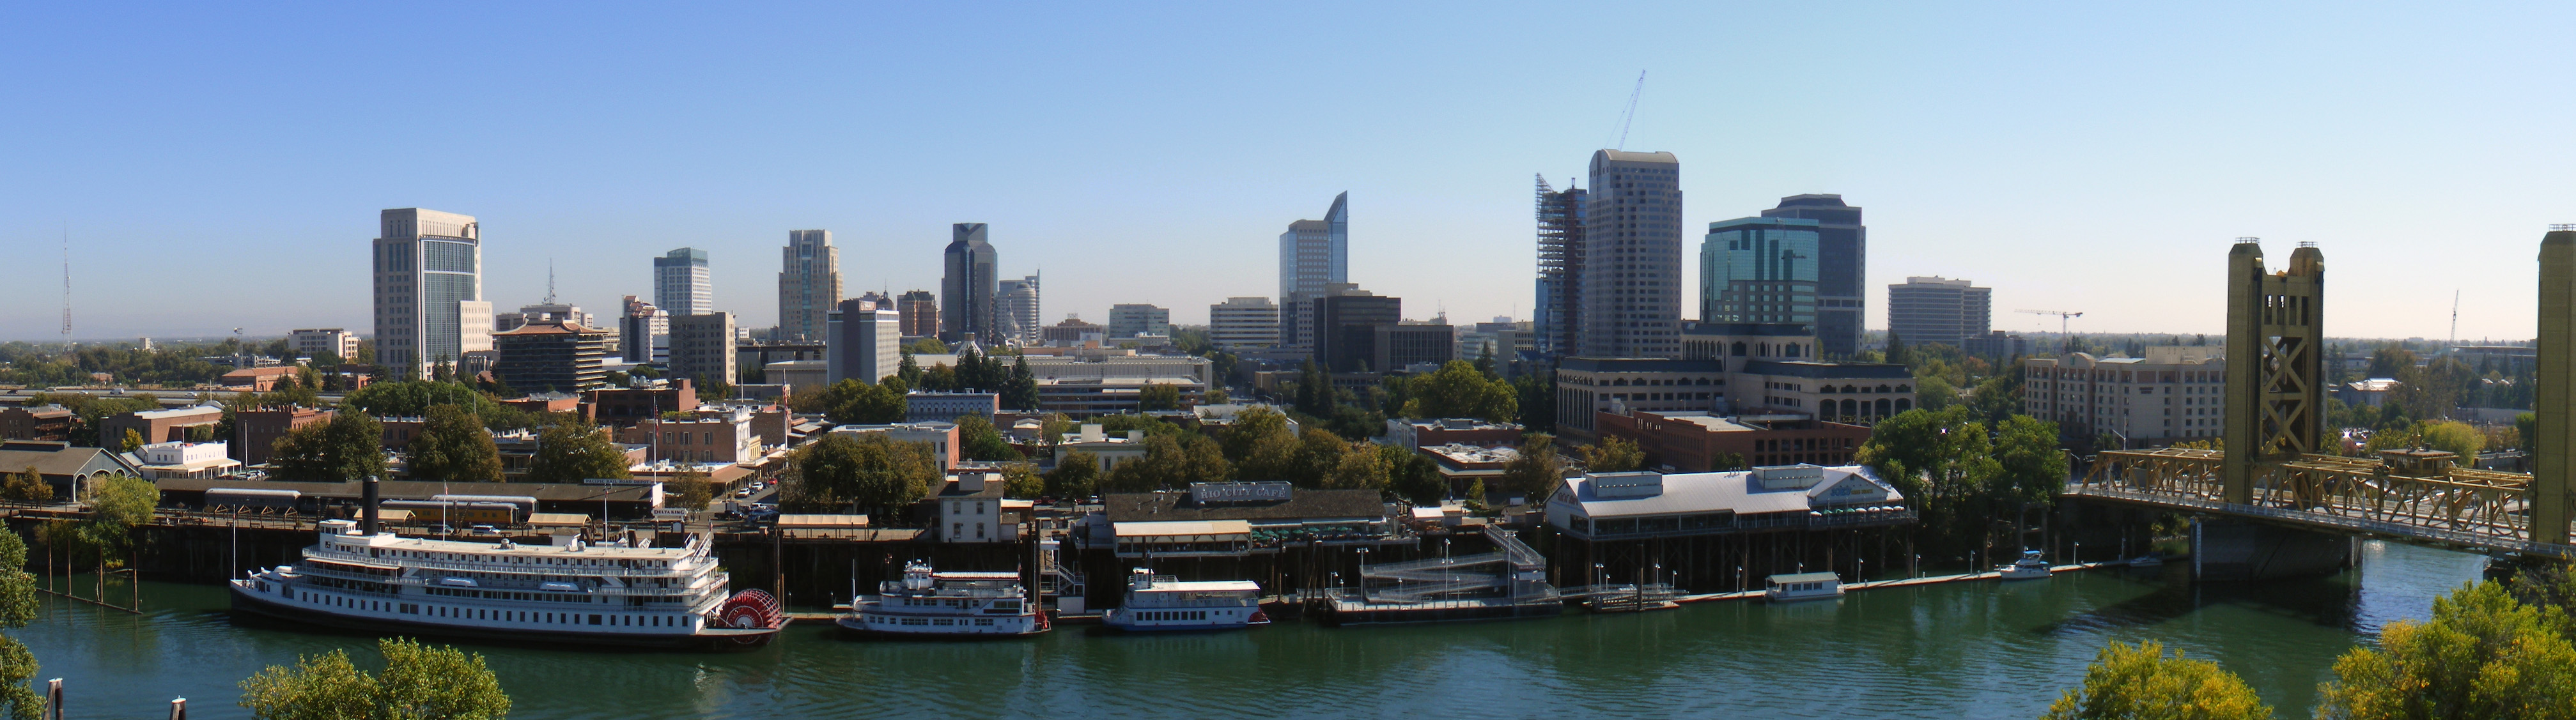 Sacramento Skyline Cropped Another One For Old Sac HD Wallpaper Cars